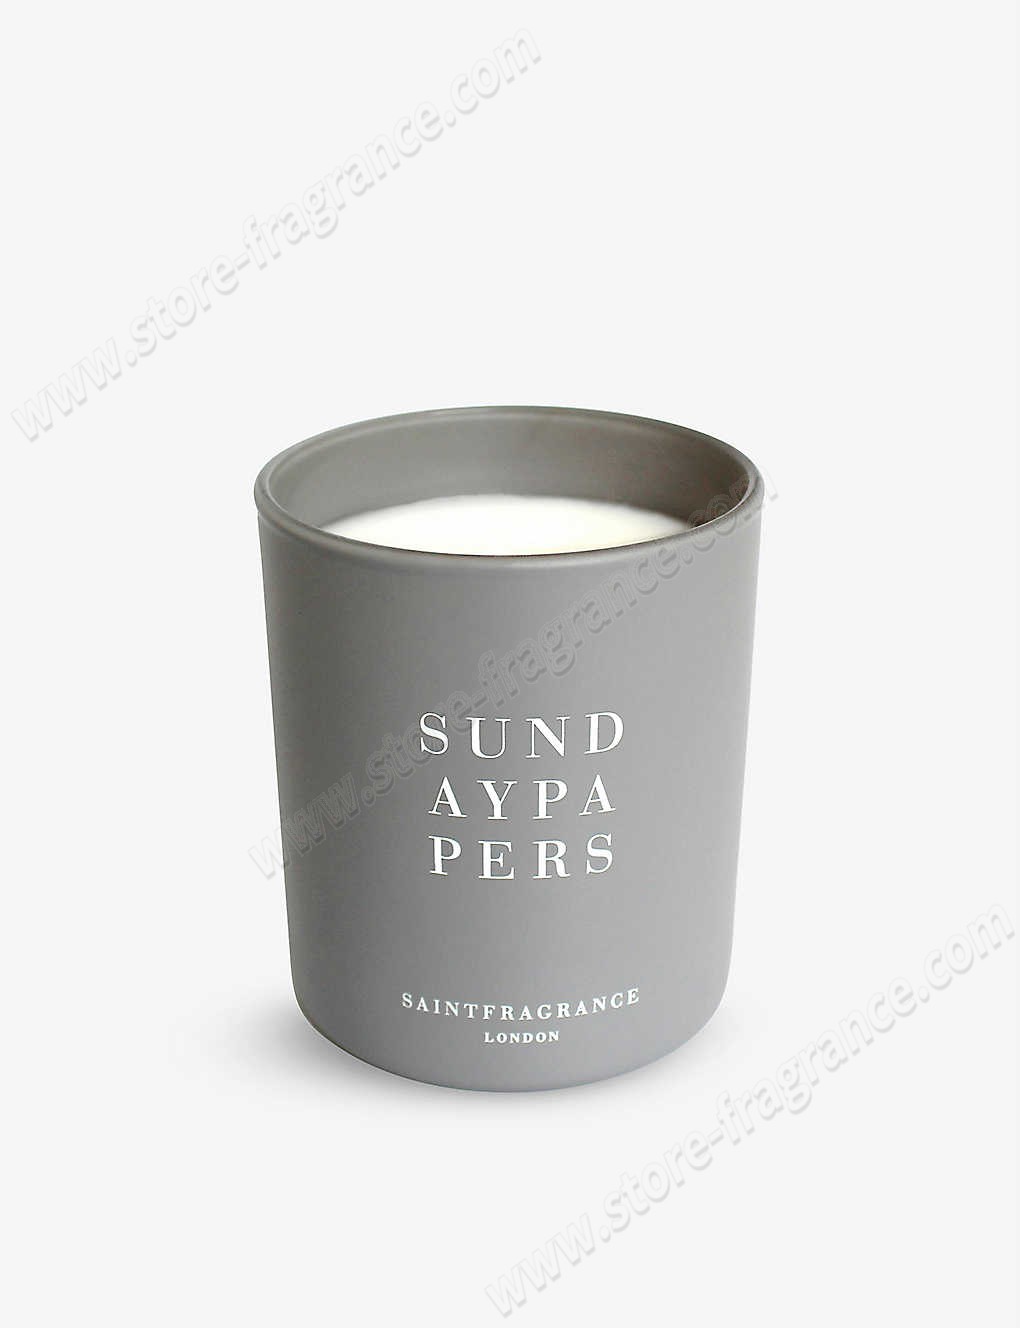 SAINT FRAGRANCE LONDON/Sunday Papers scented candle 200g ✿ Discount Store - SAINT FRAGRANCE LONDON/Sunday Papers scented candle 200g ✿ Discount Store